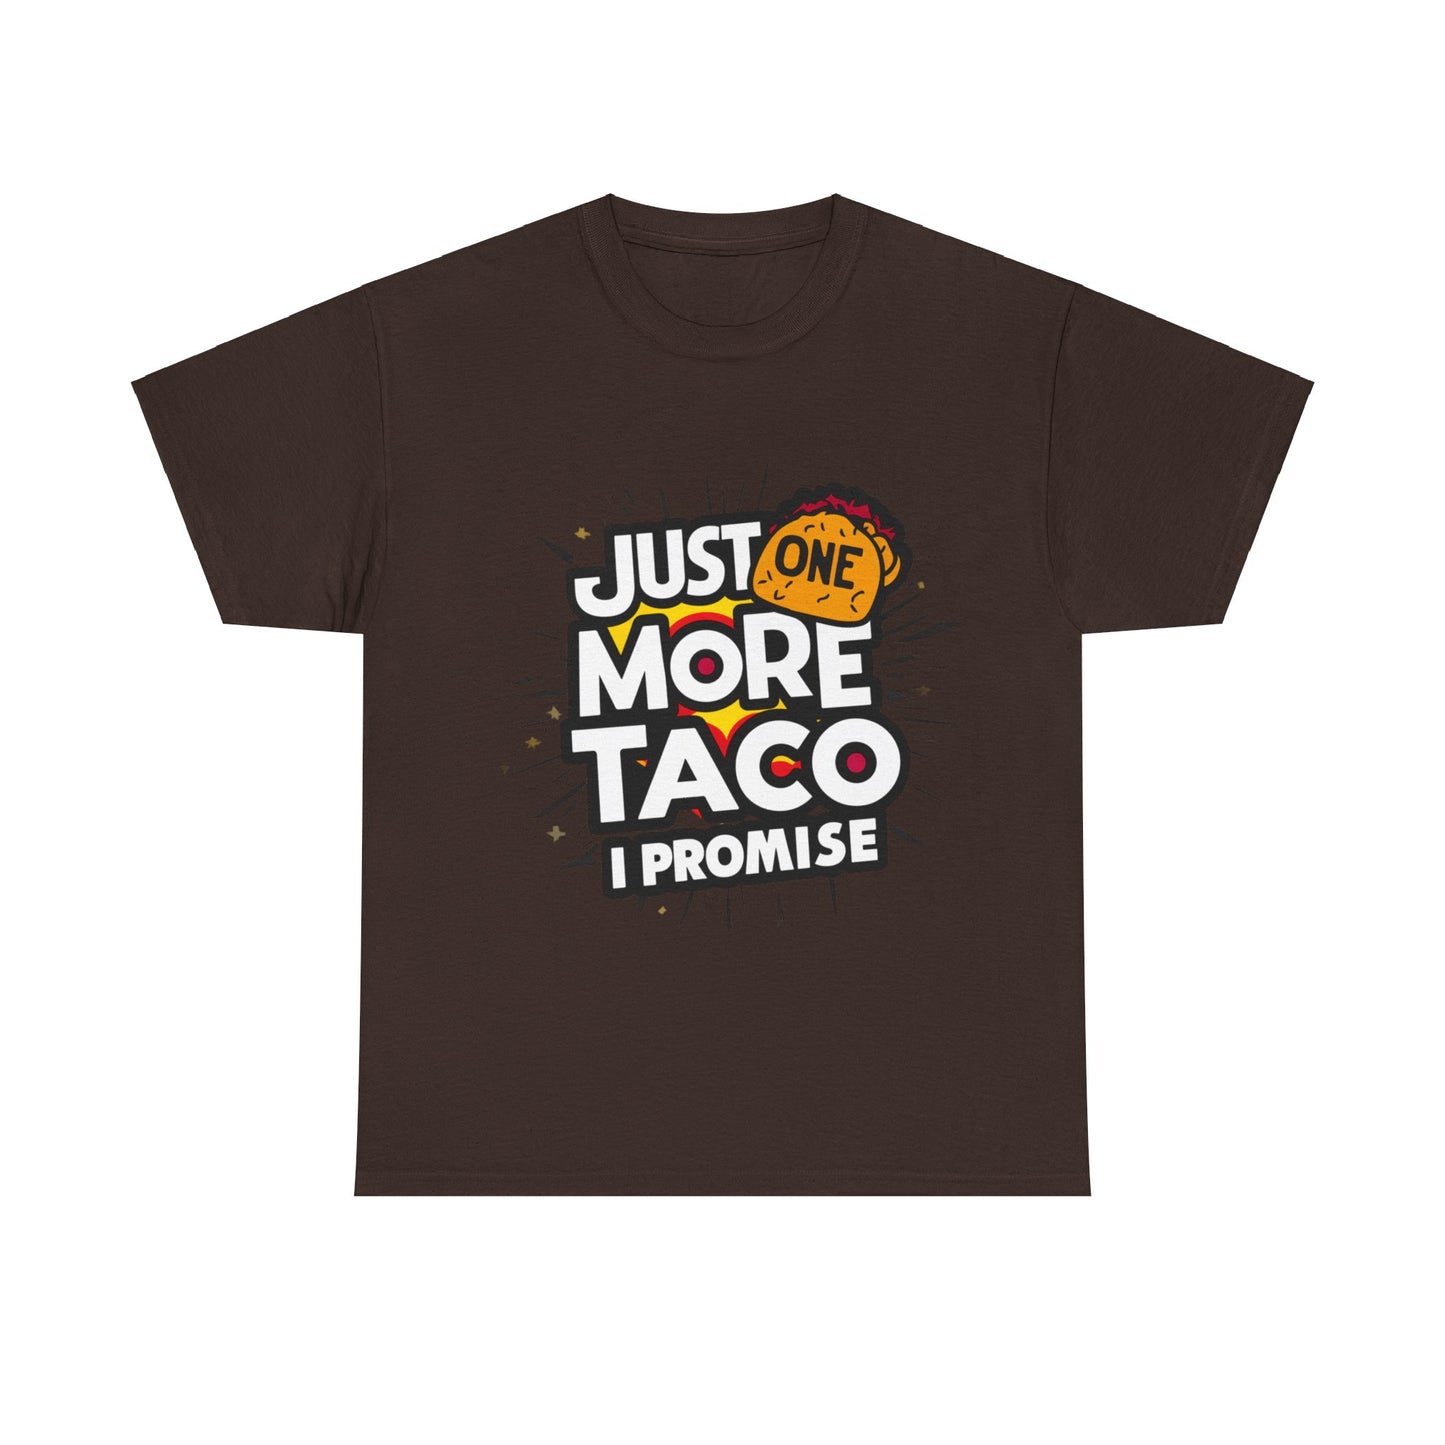 Copy of Just One More Taco I Promise Mexican Food Graphic Unisex Heavy Cotton Tee Cotton Funny Humorous Graphic Soft Premium Unisex Men Women Dark Chocolate T-shirt Birthday Gift-3